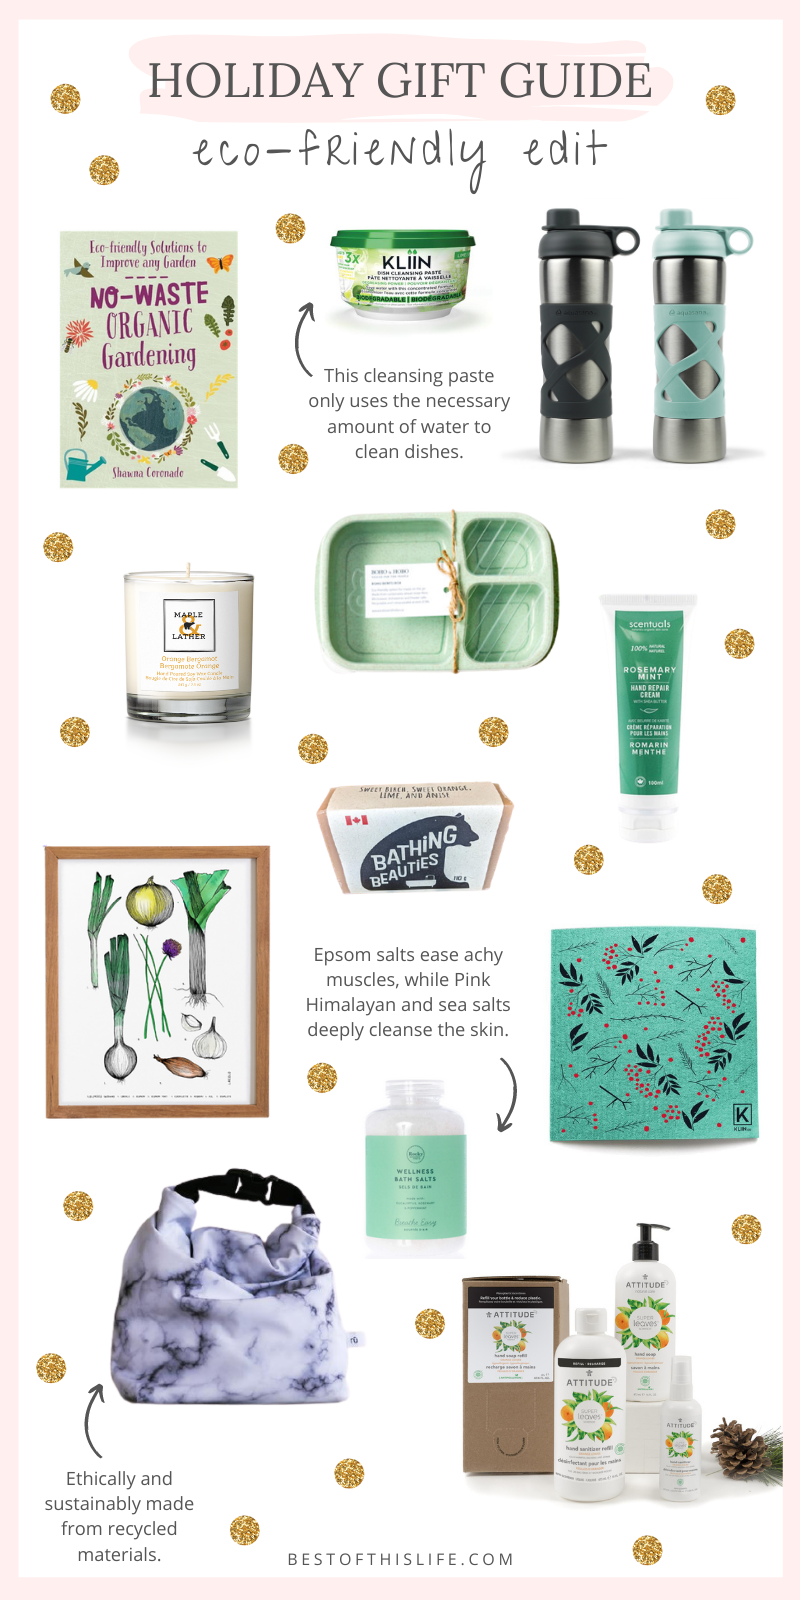 Top 20 Eco-Friendly Gift Ideas for Your Friends and Family